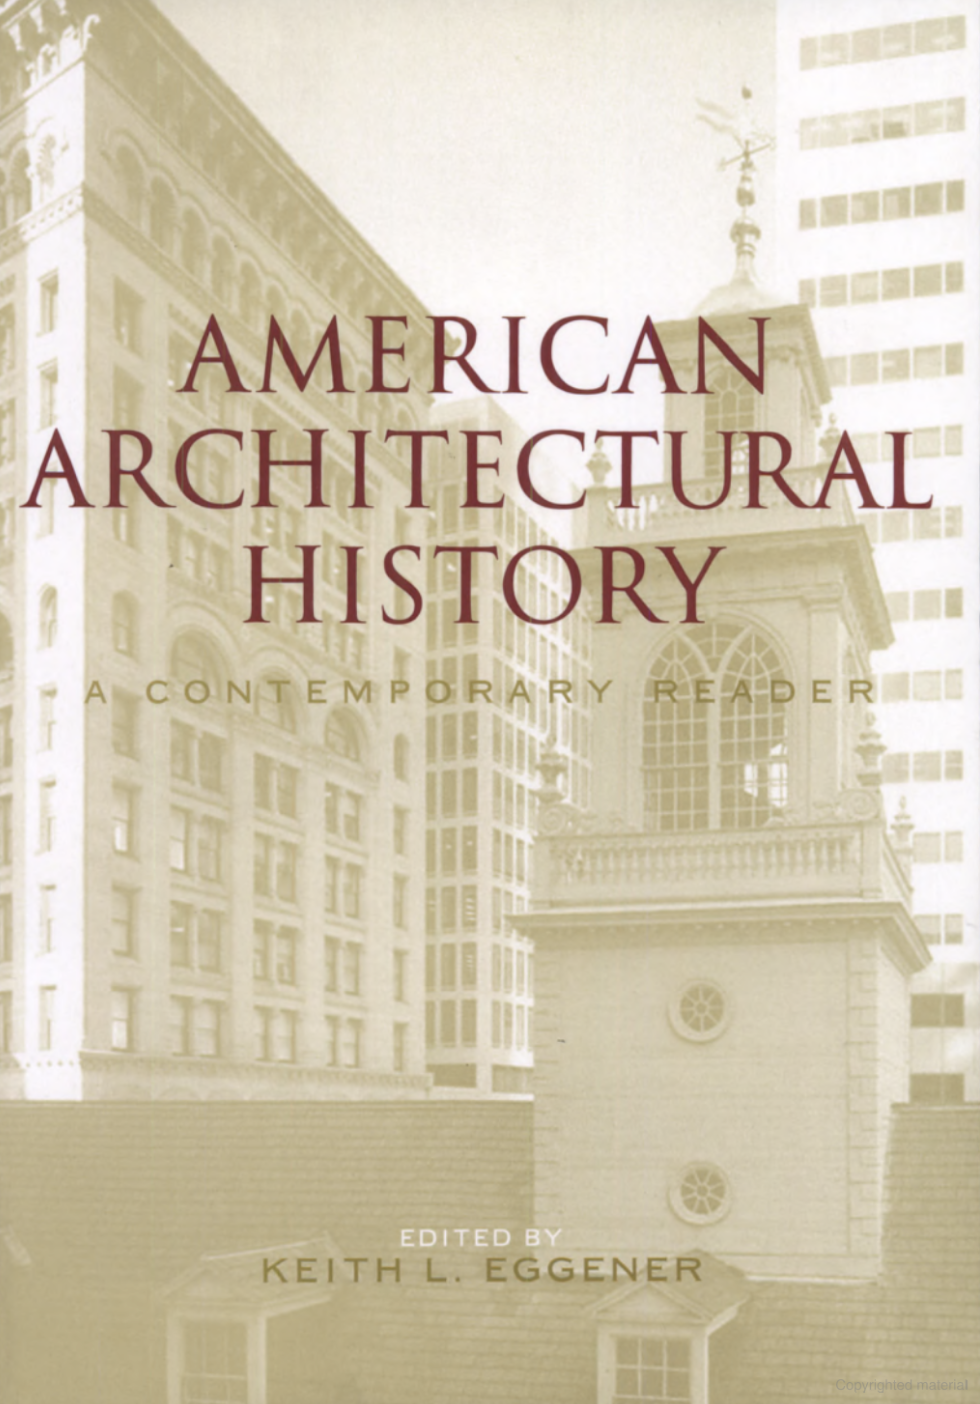 American Architectural History cover.